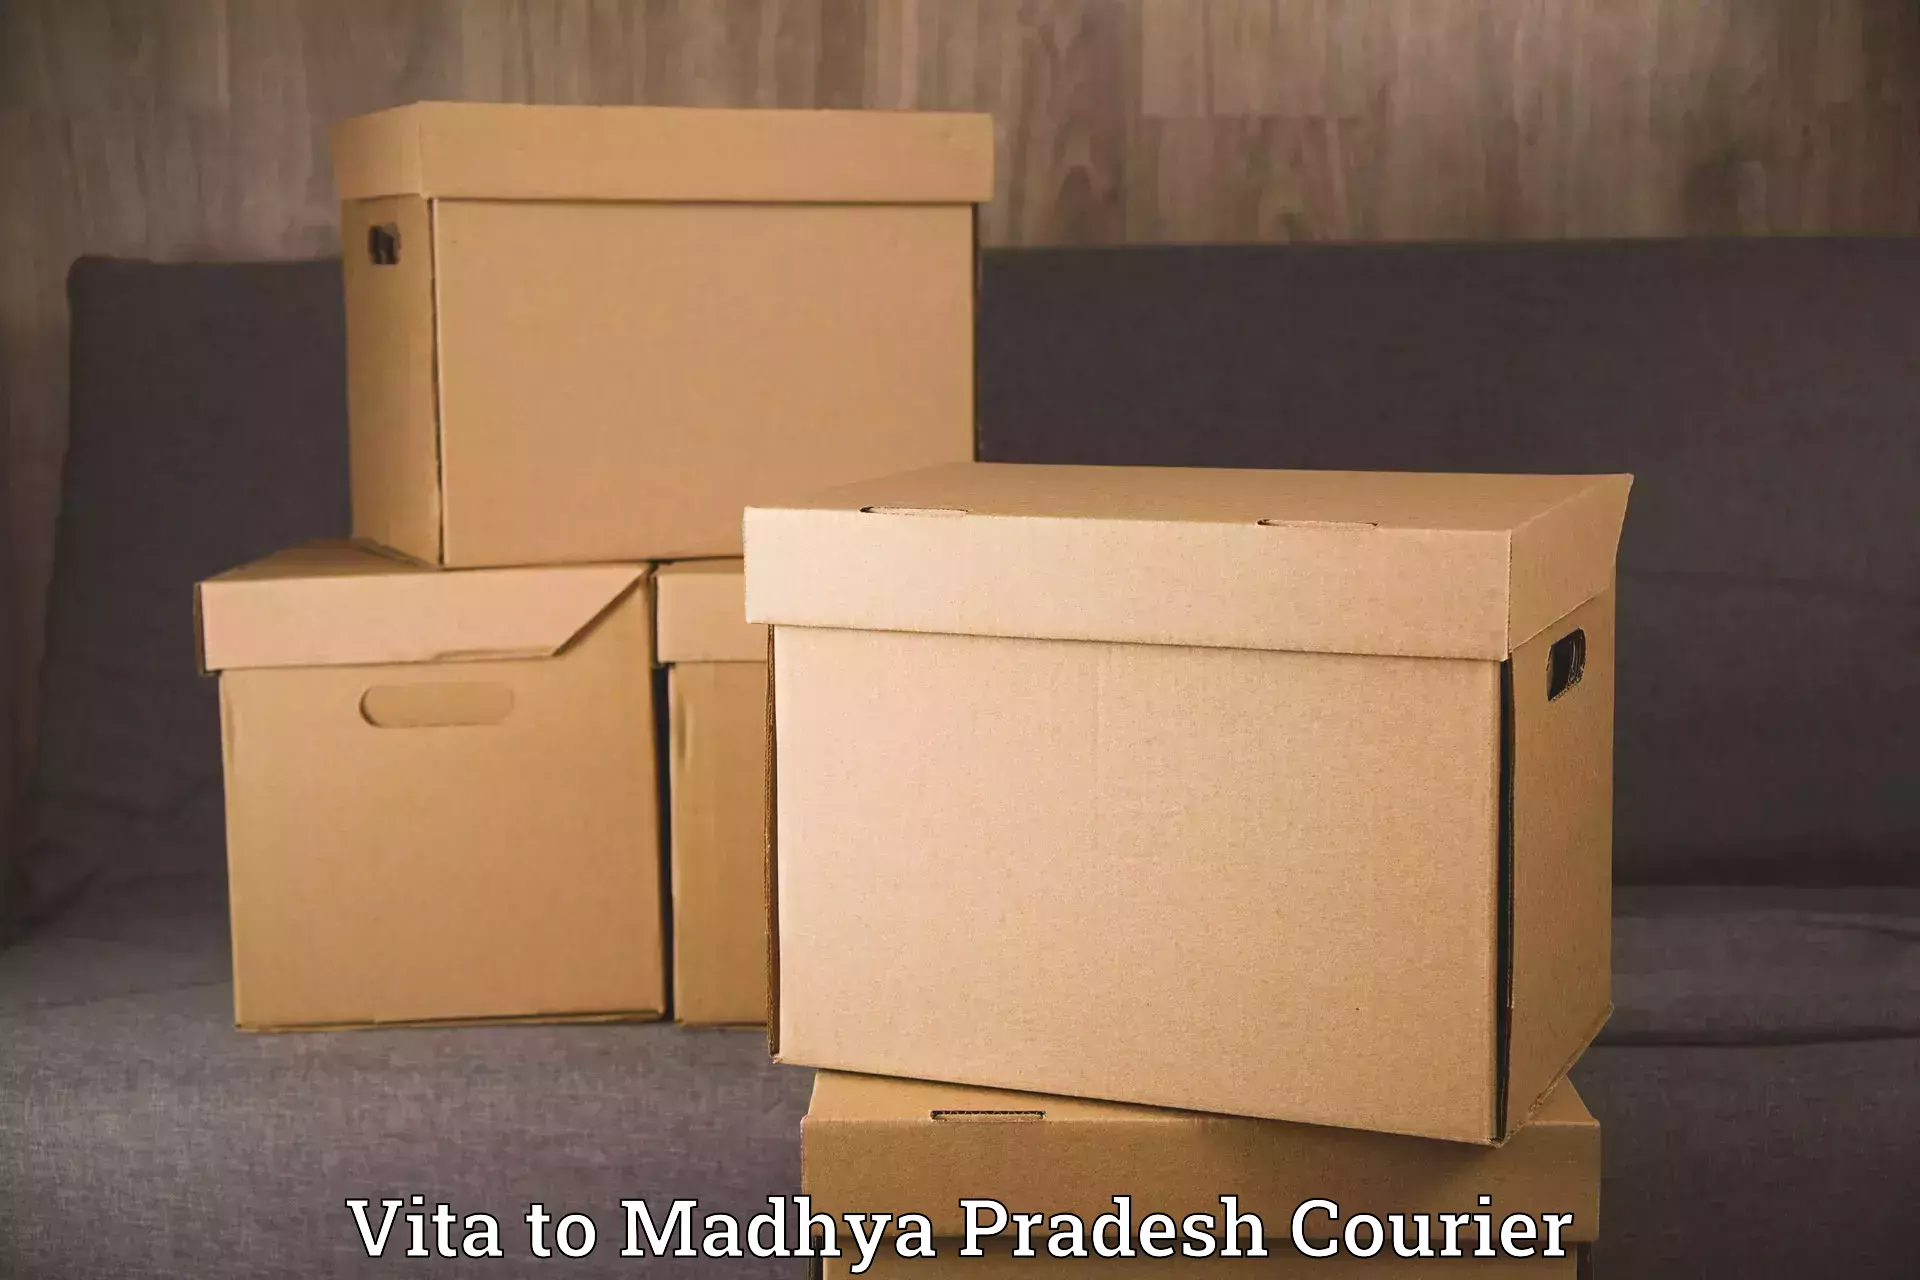 Residential moving experts Vita to Sheopur